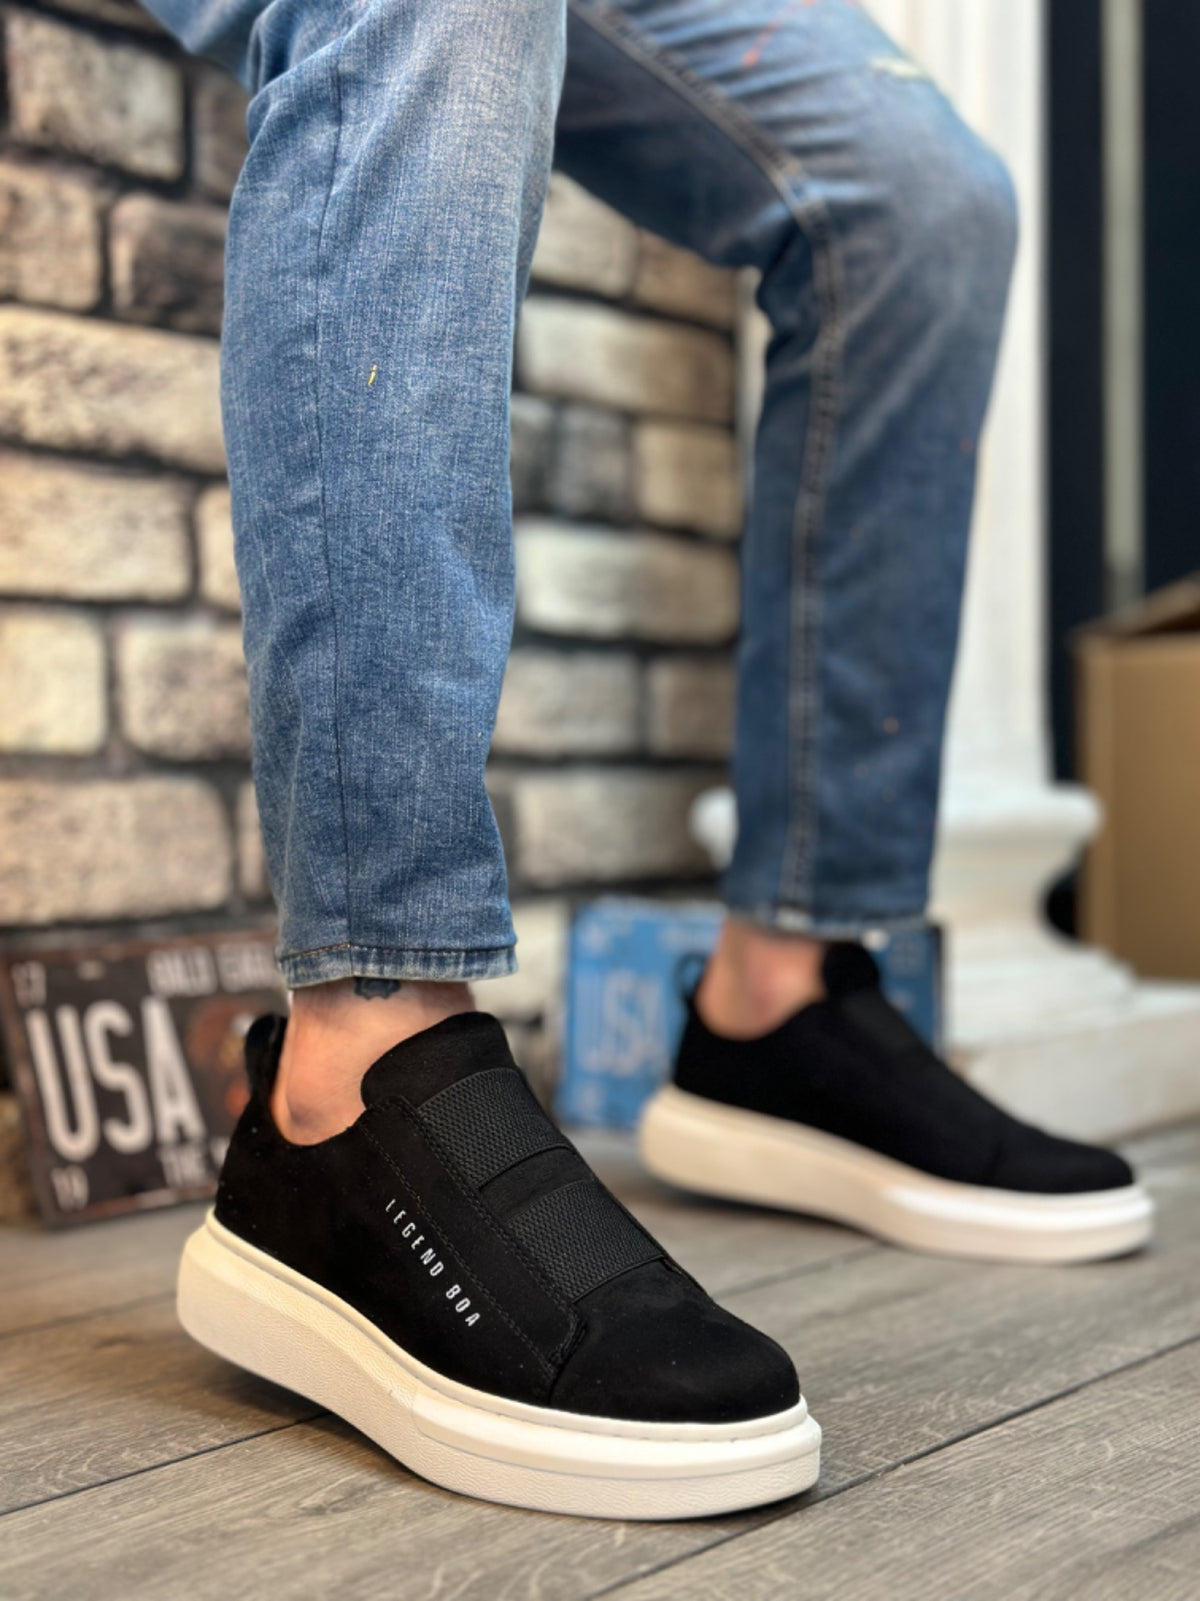 BA0307 Thick Suede Double Tape Black White Sole Men's Shoes - STREETMODE™